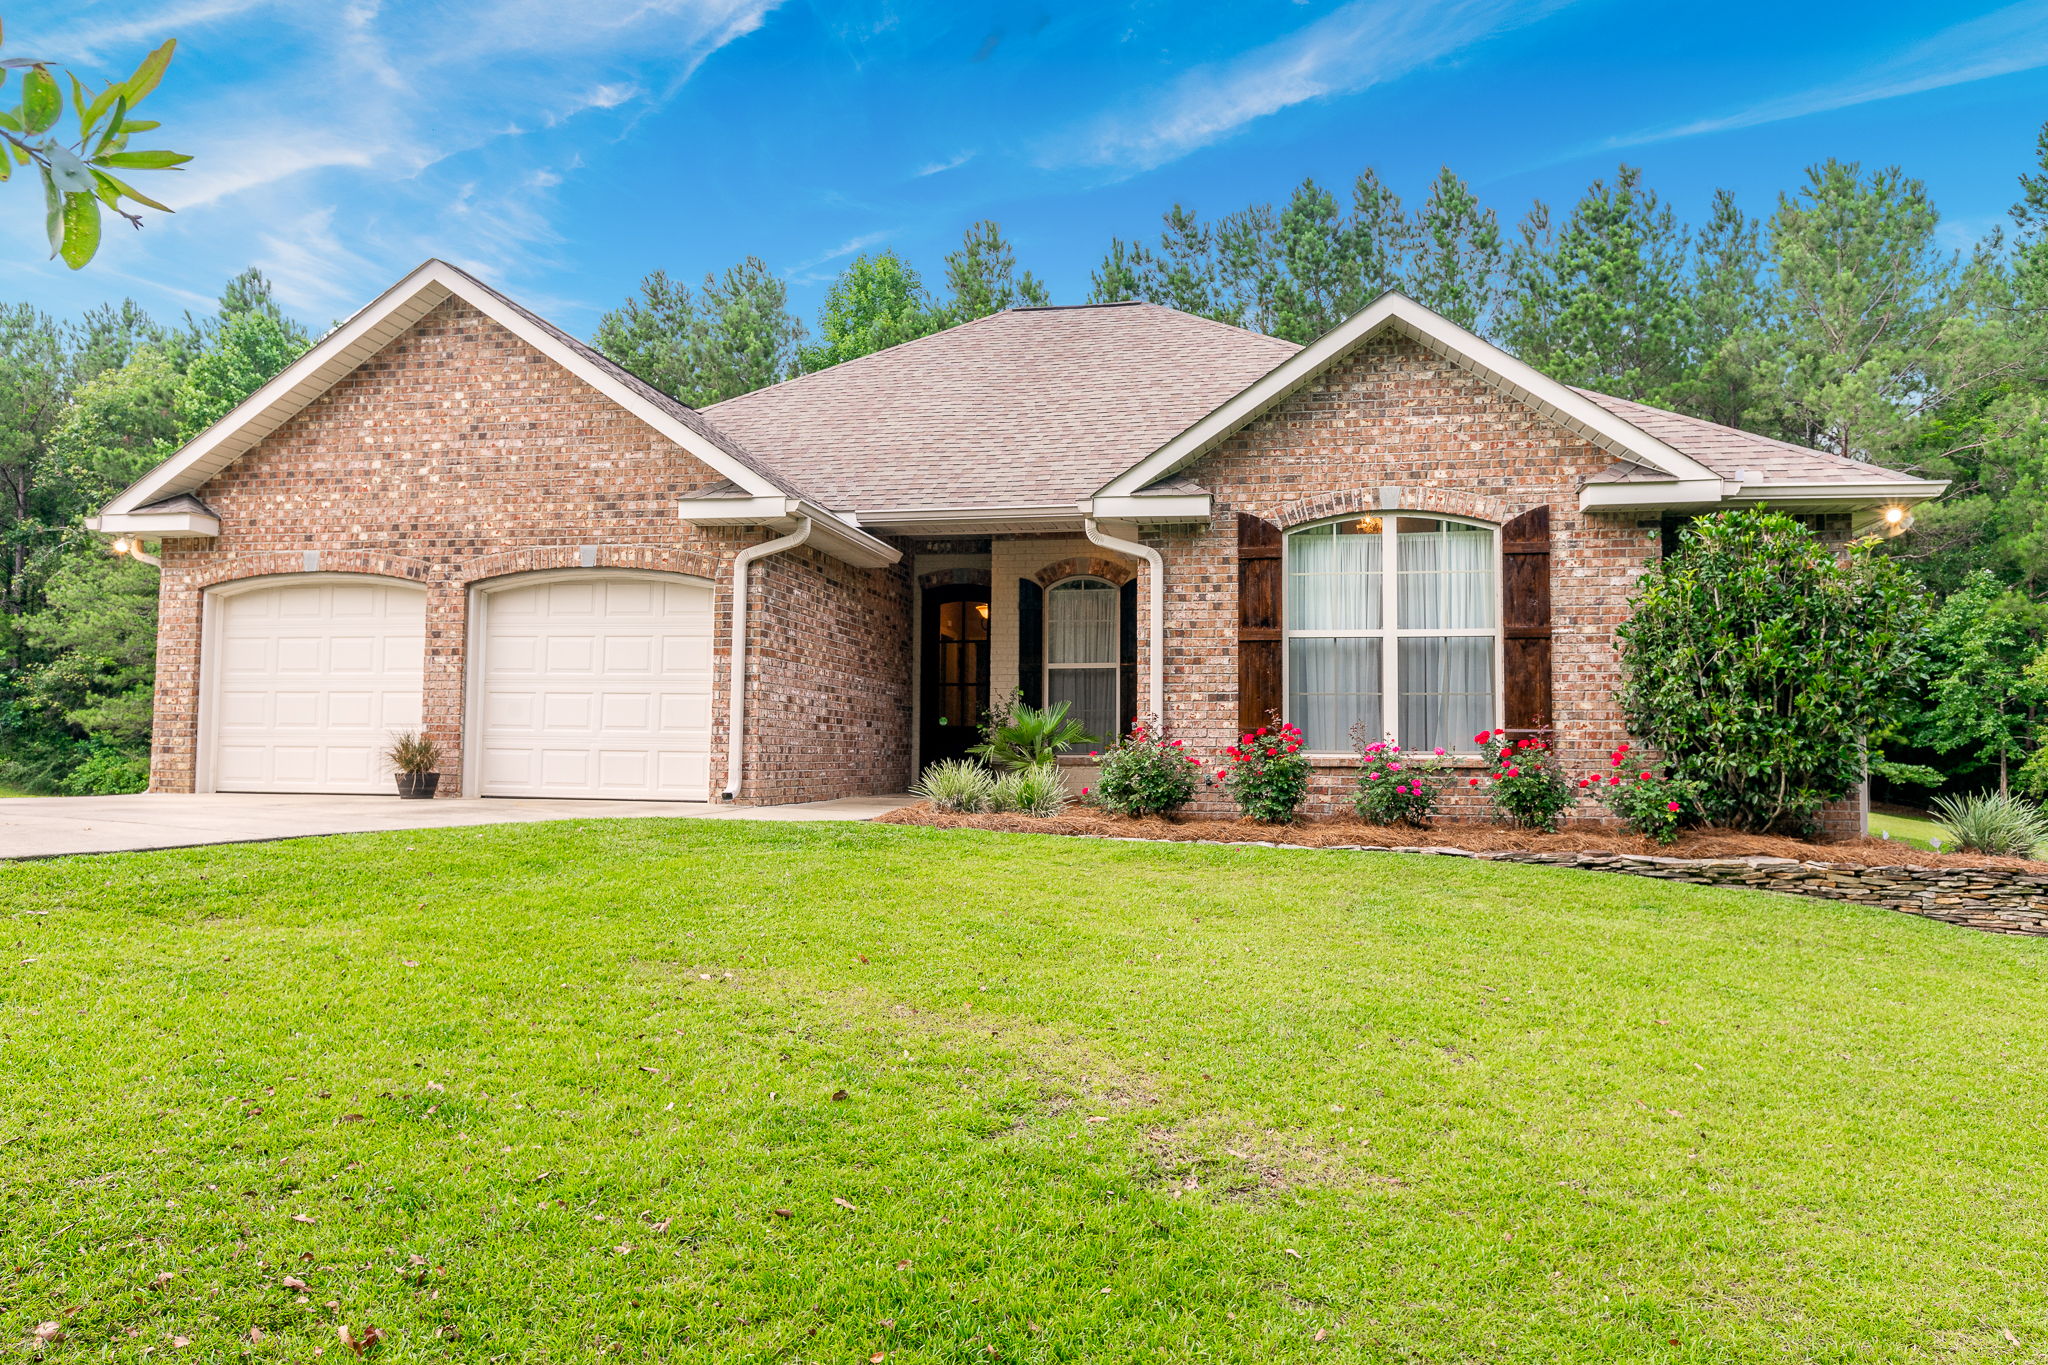  41 Pleasant Hill, Sumrall, MS 39482, US